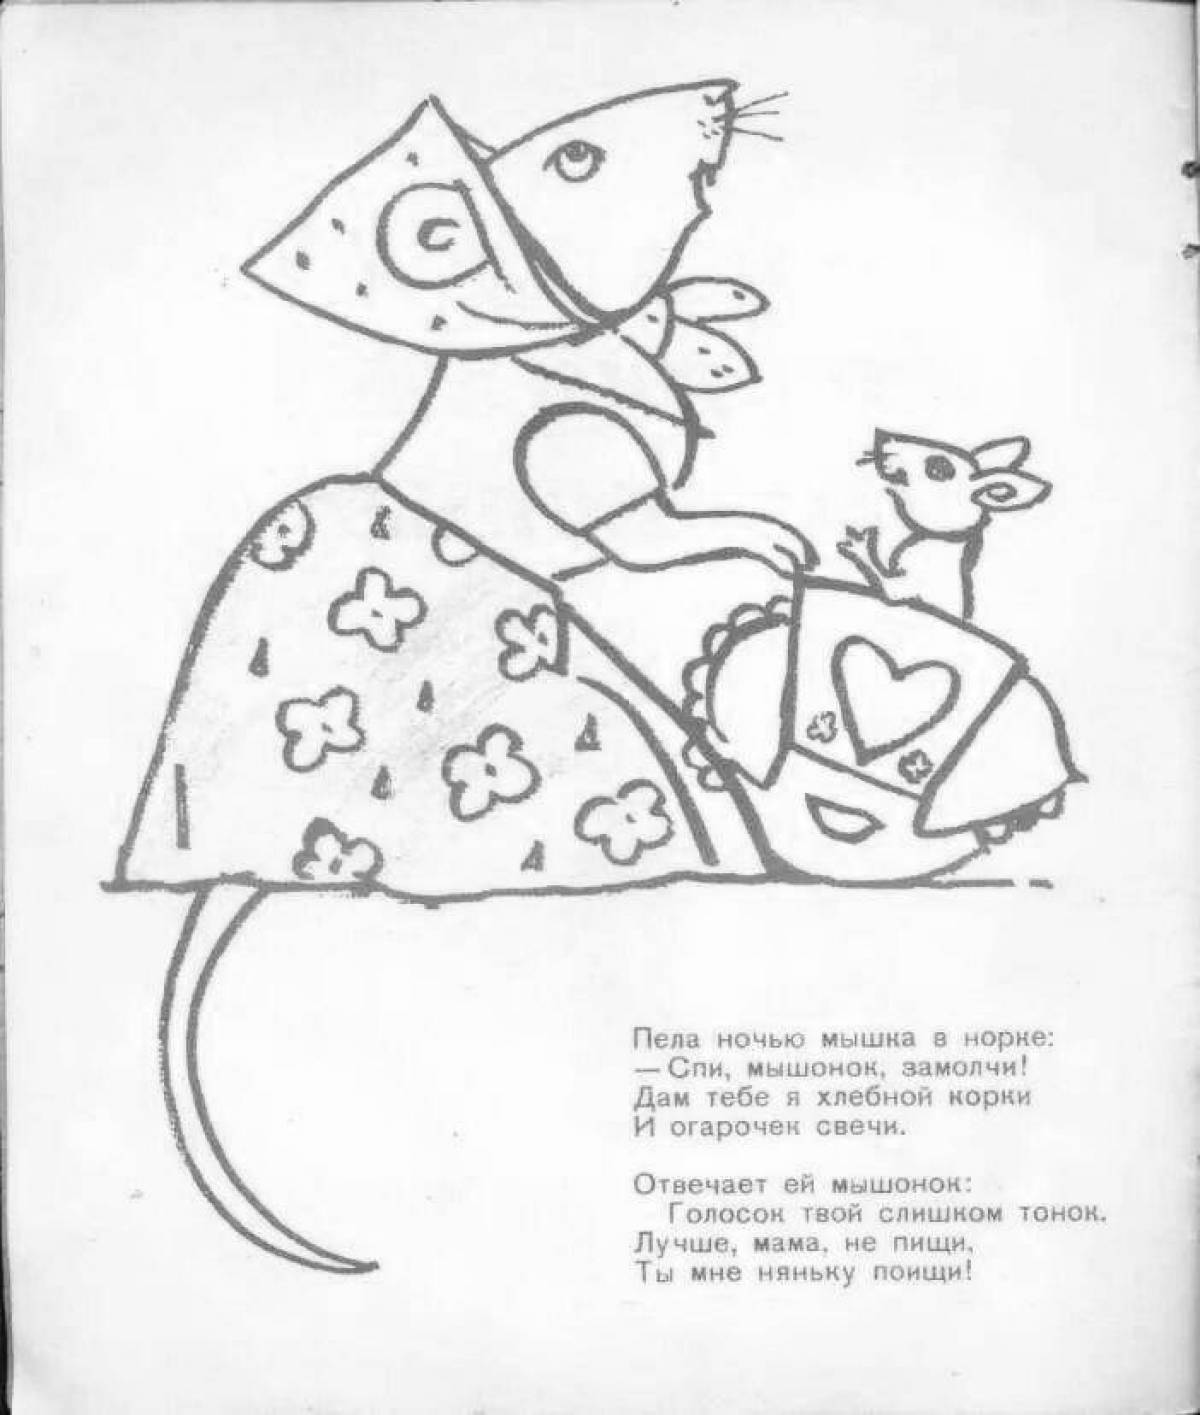 Adorable coloring book tale of the silly little mouse